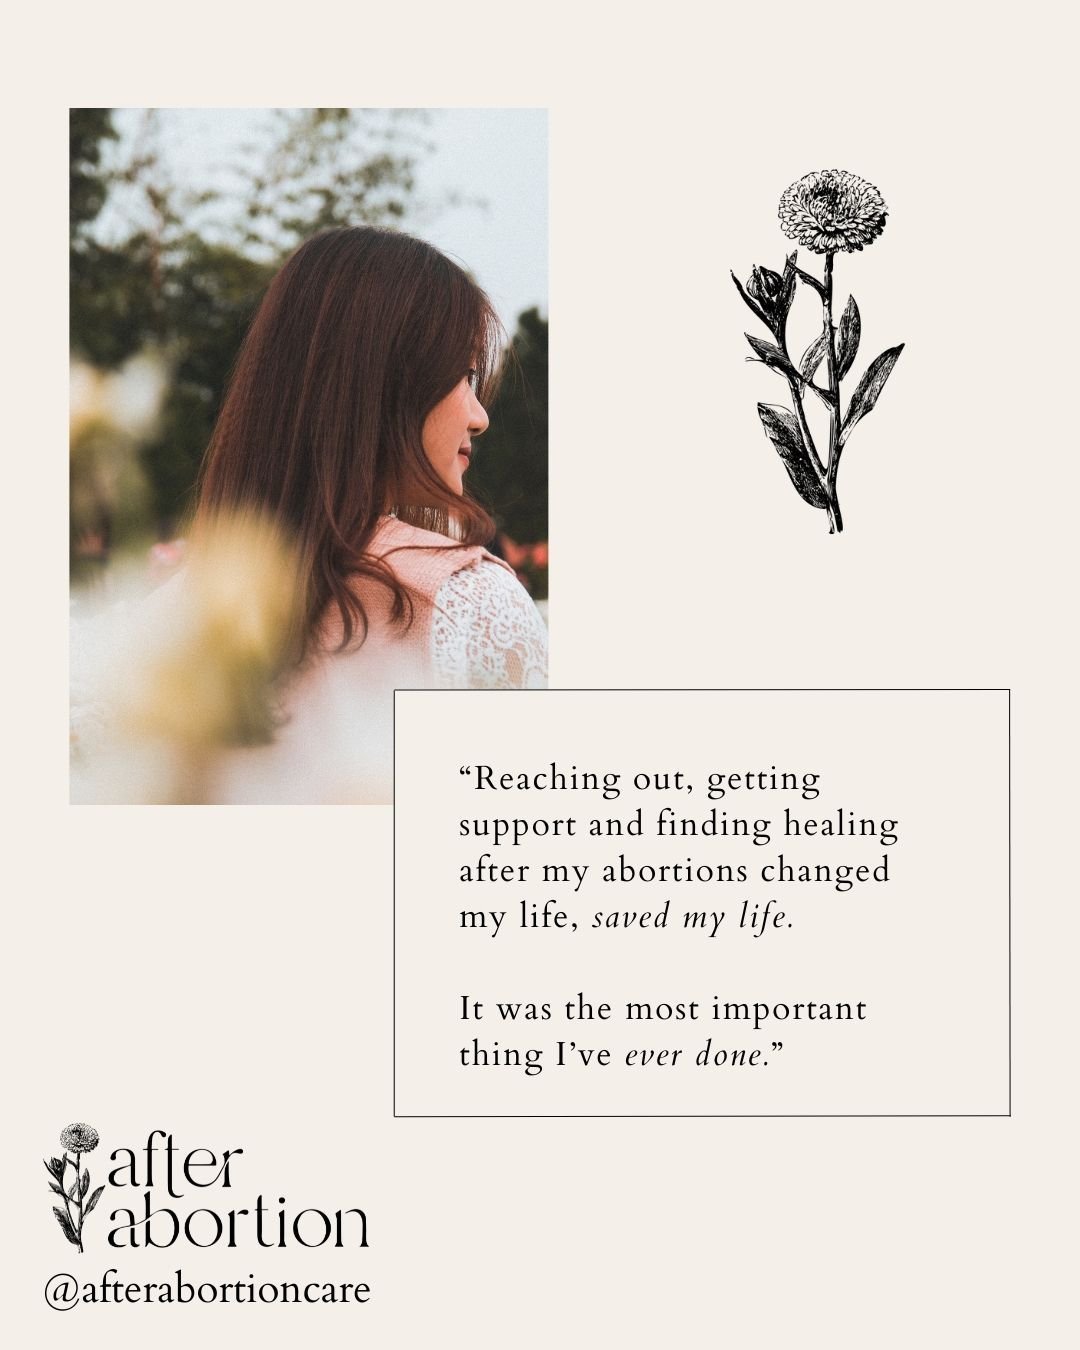 Many have walked before you and found peace. You can too. 💜

For more info, email us at info@helpafterabortion.org or call us at 703.841.2504. We are here for you. 

#afterabortioncare
#wecare
#youarenotalone